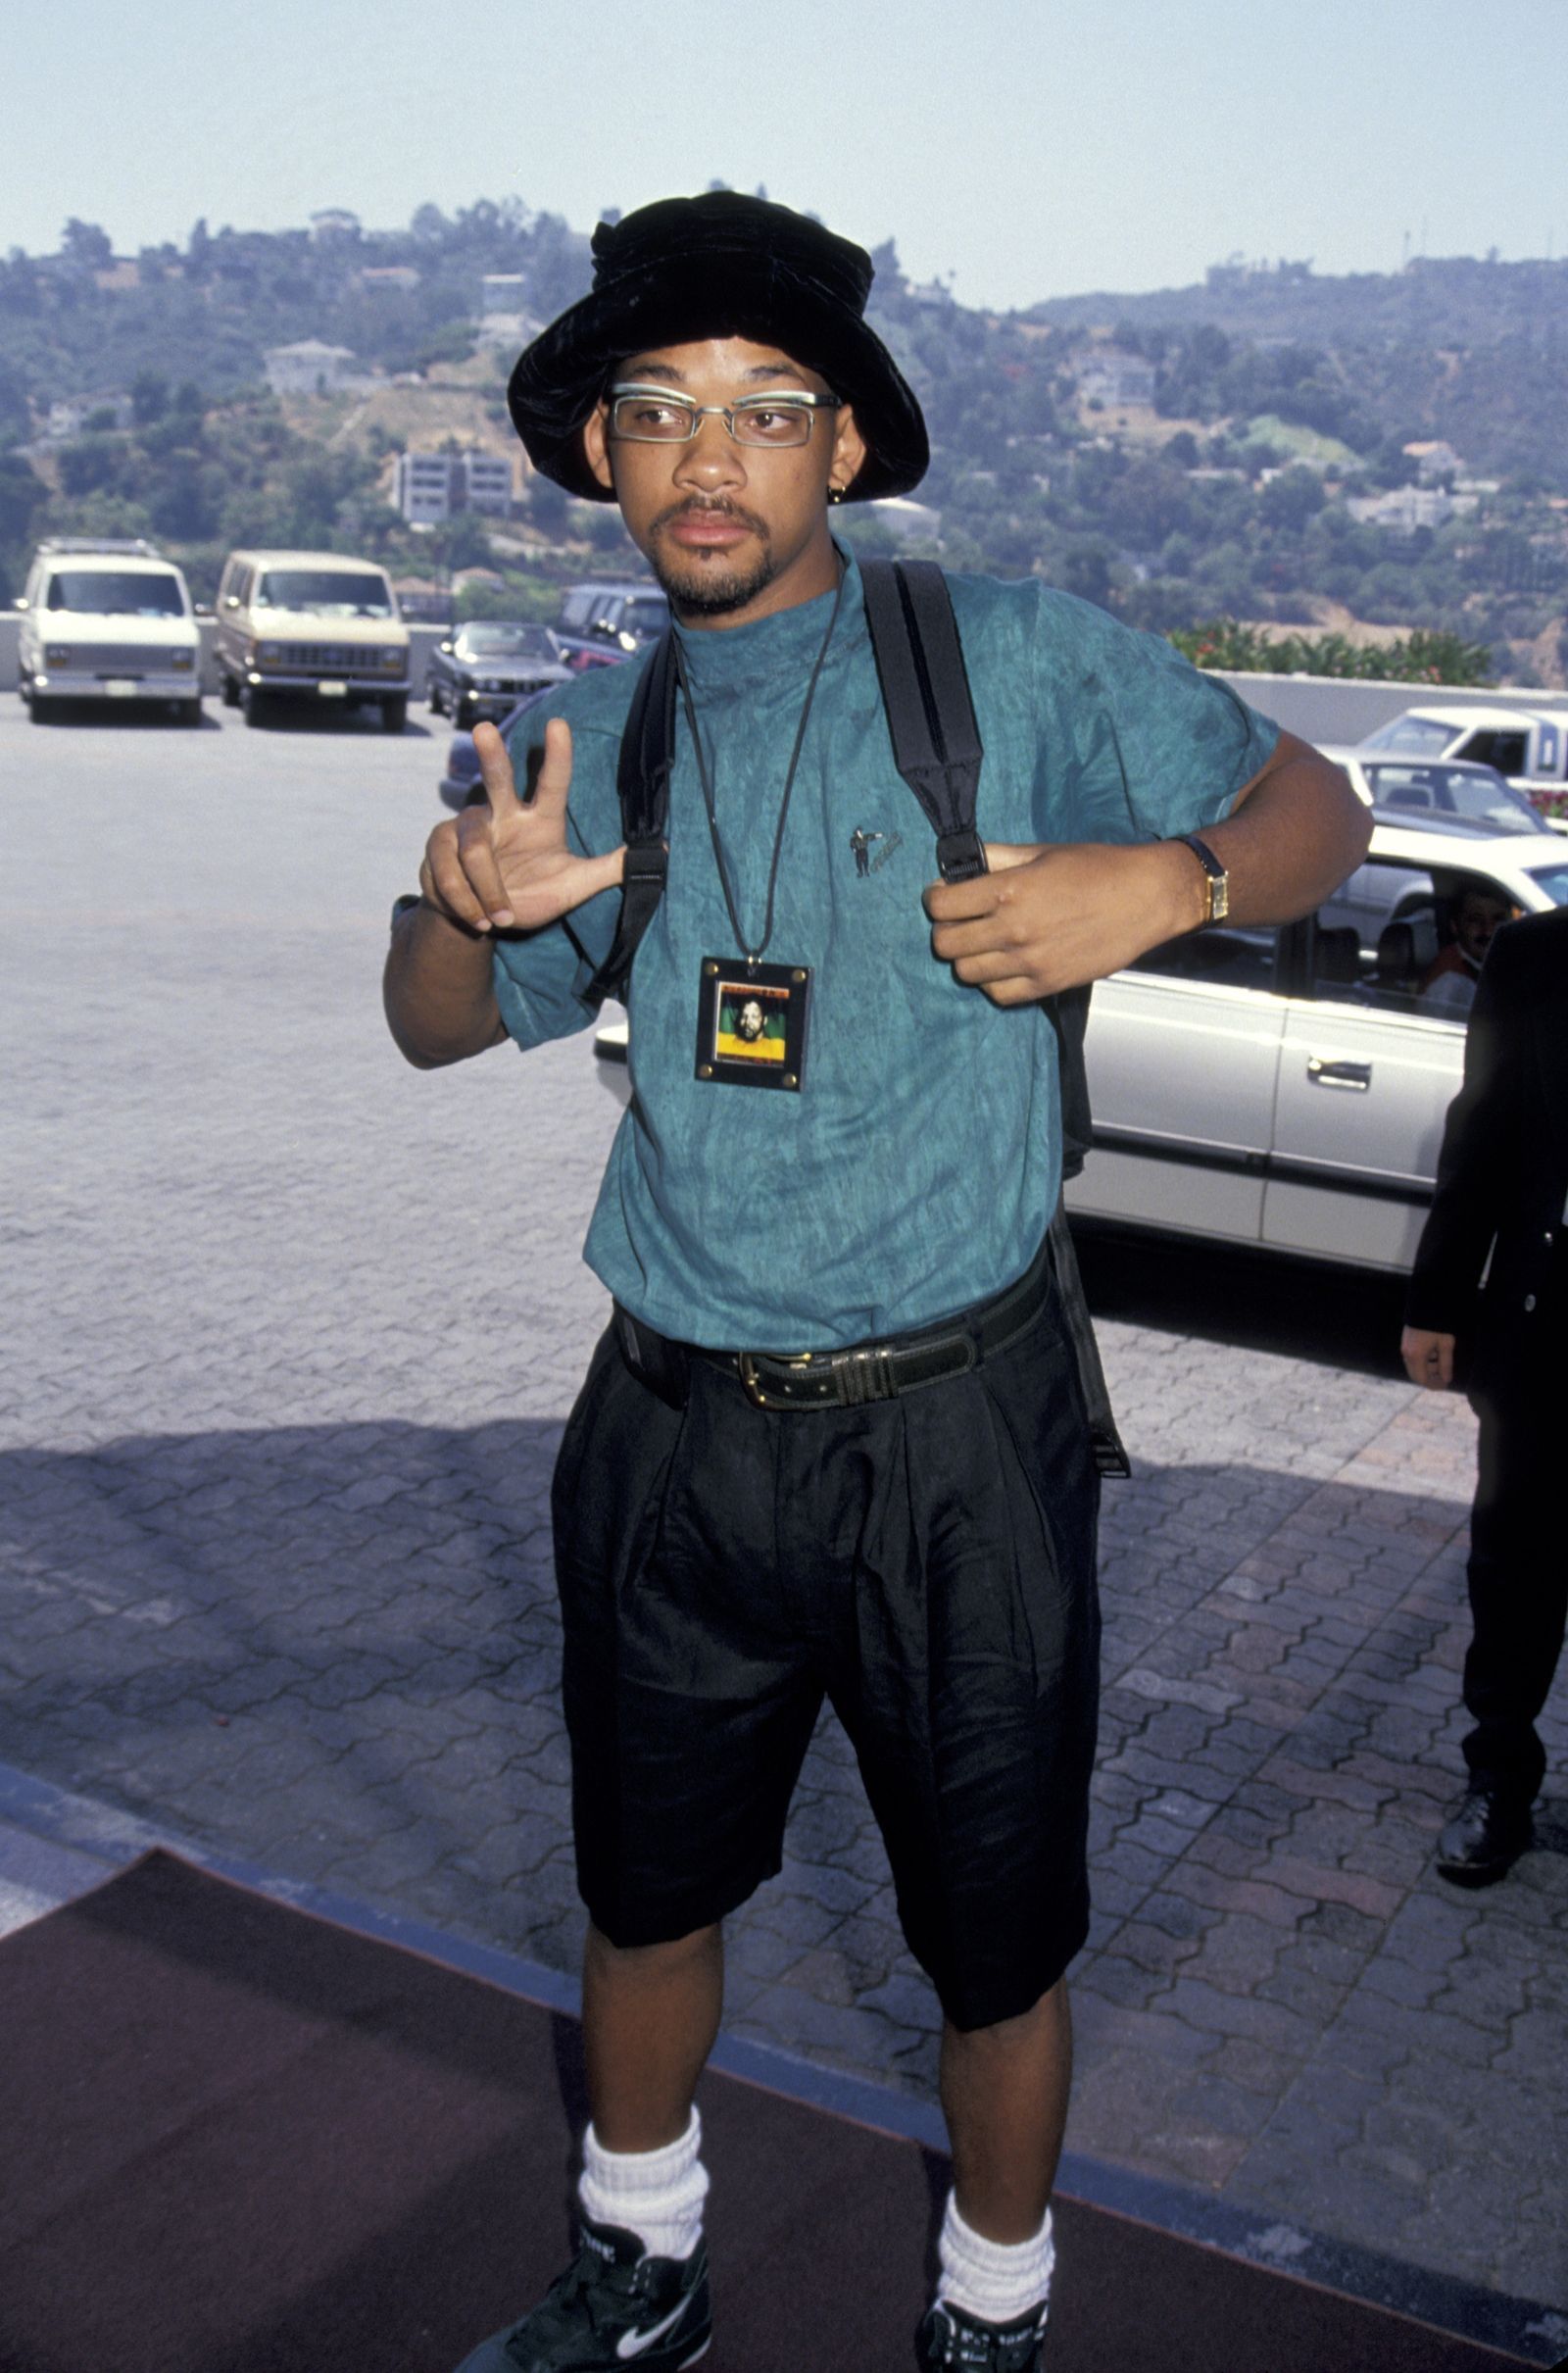 of the Best Paparazzi Moments from the '90ss